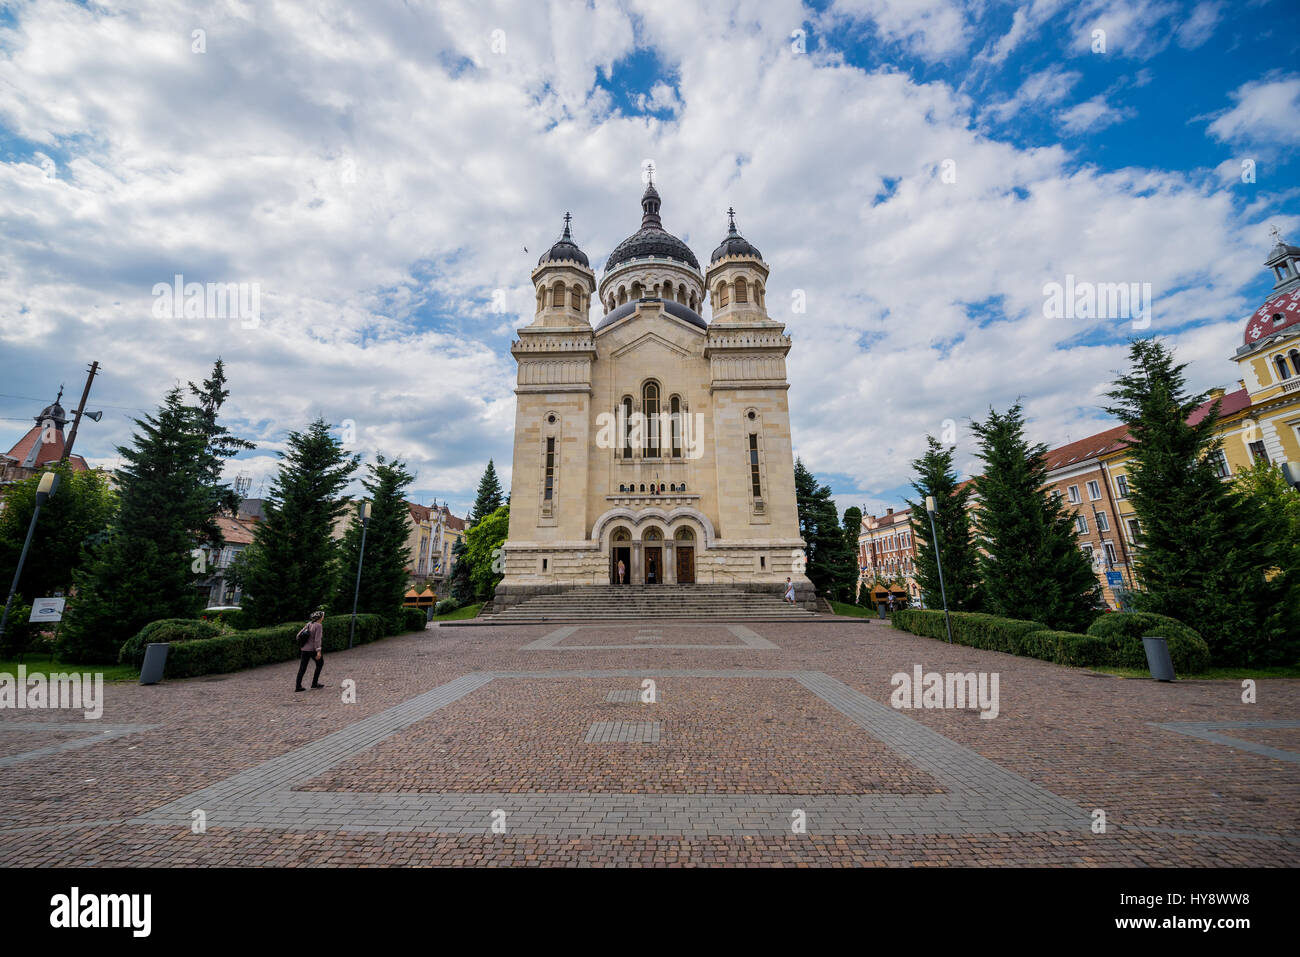 Romanian Orthodox Cathedral of Dormition of the Theotokos on Avram Iancu Square in Cluj Napoca, second most populous city in Romania Stock Photo